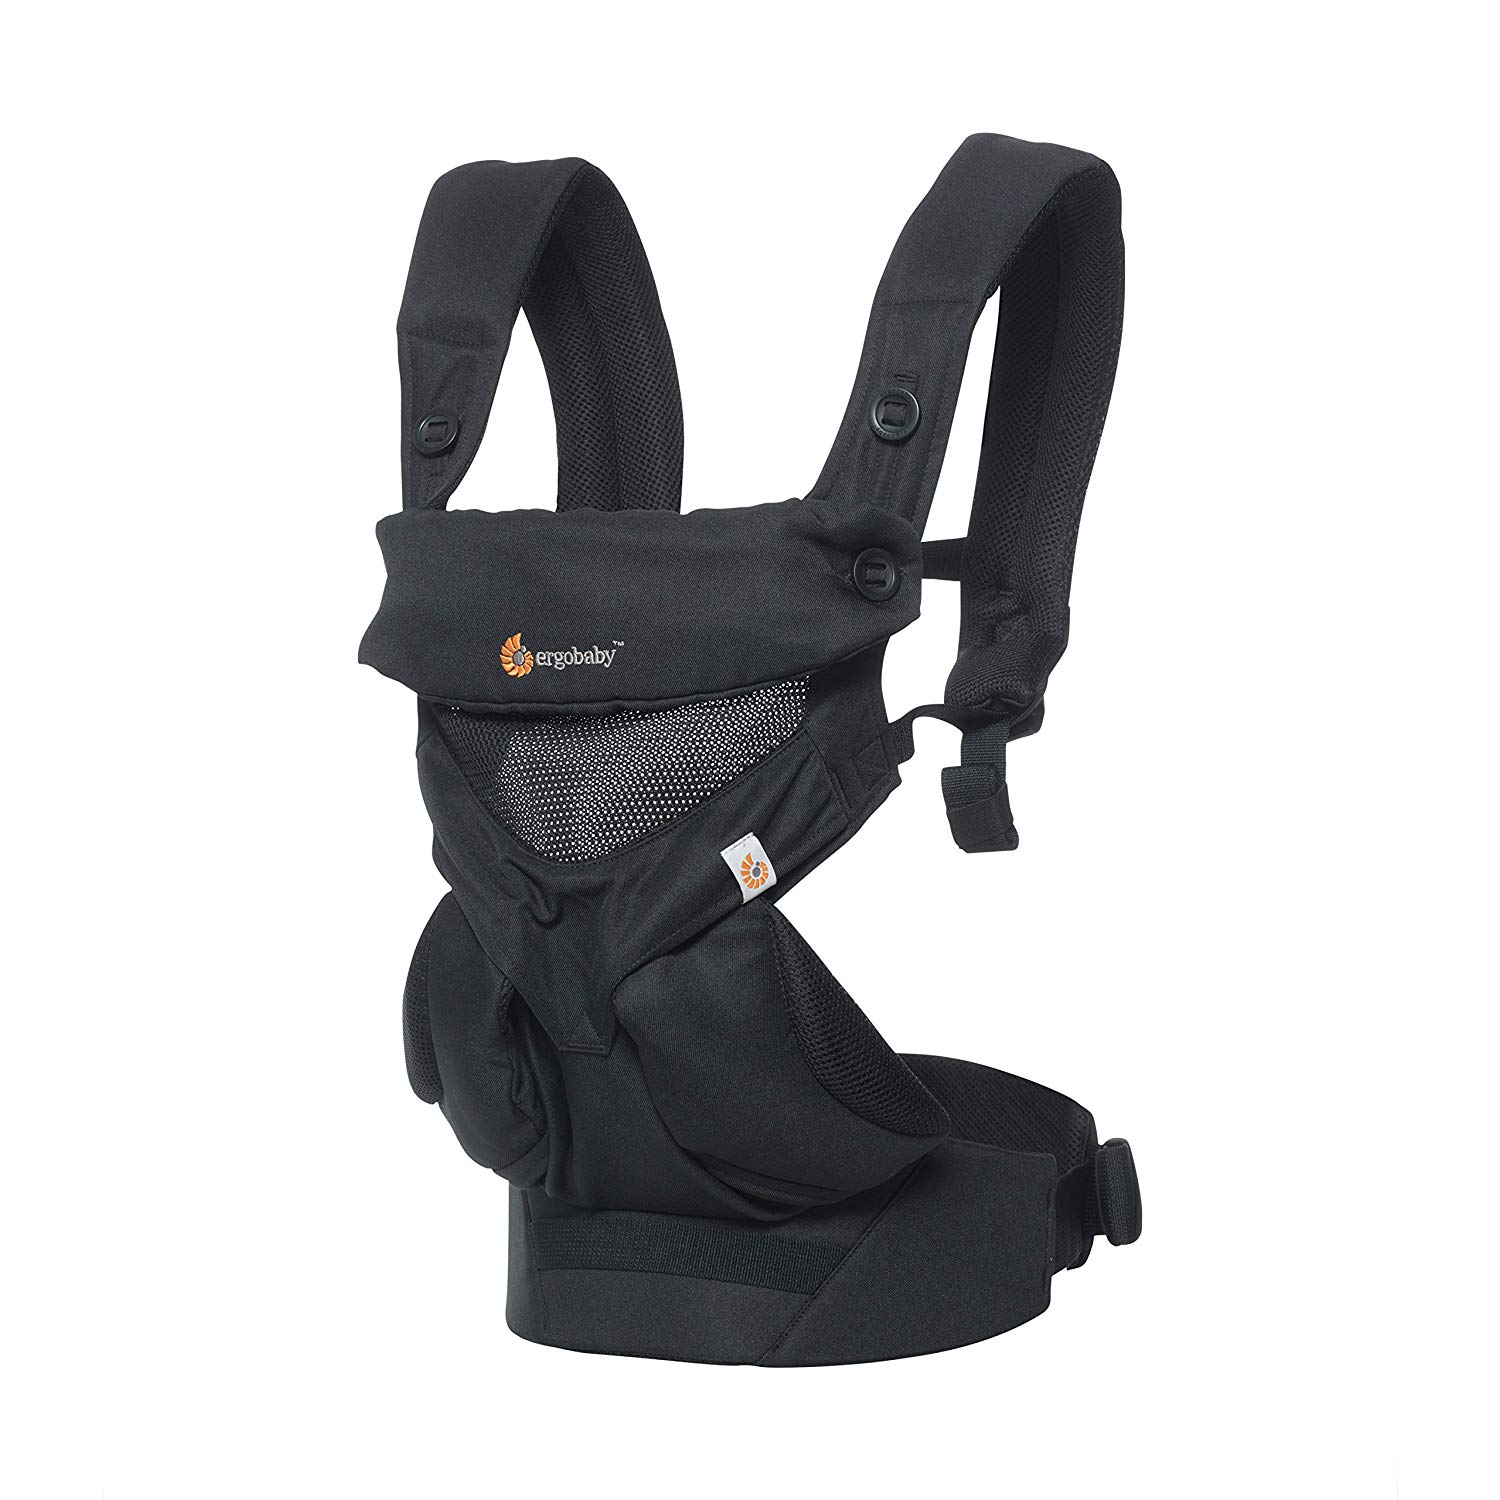 Ergobaby Baby Carrier up to 3 Years with Cool Air Mesh Onyx Black